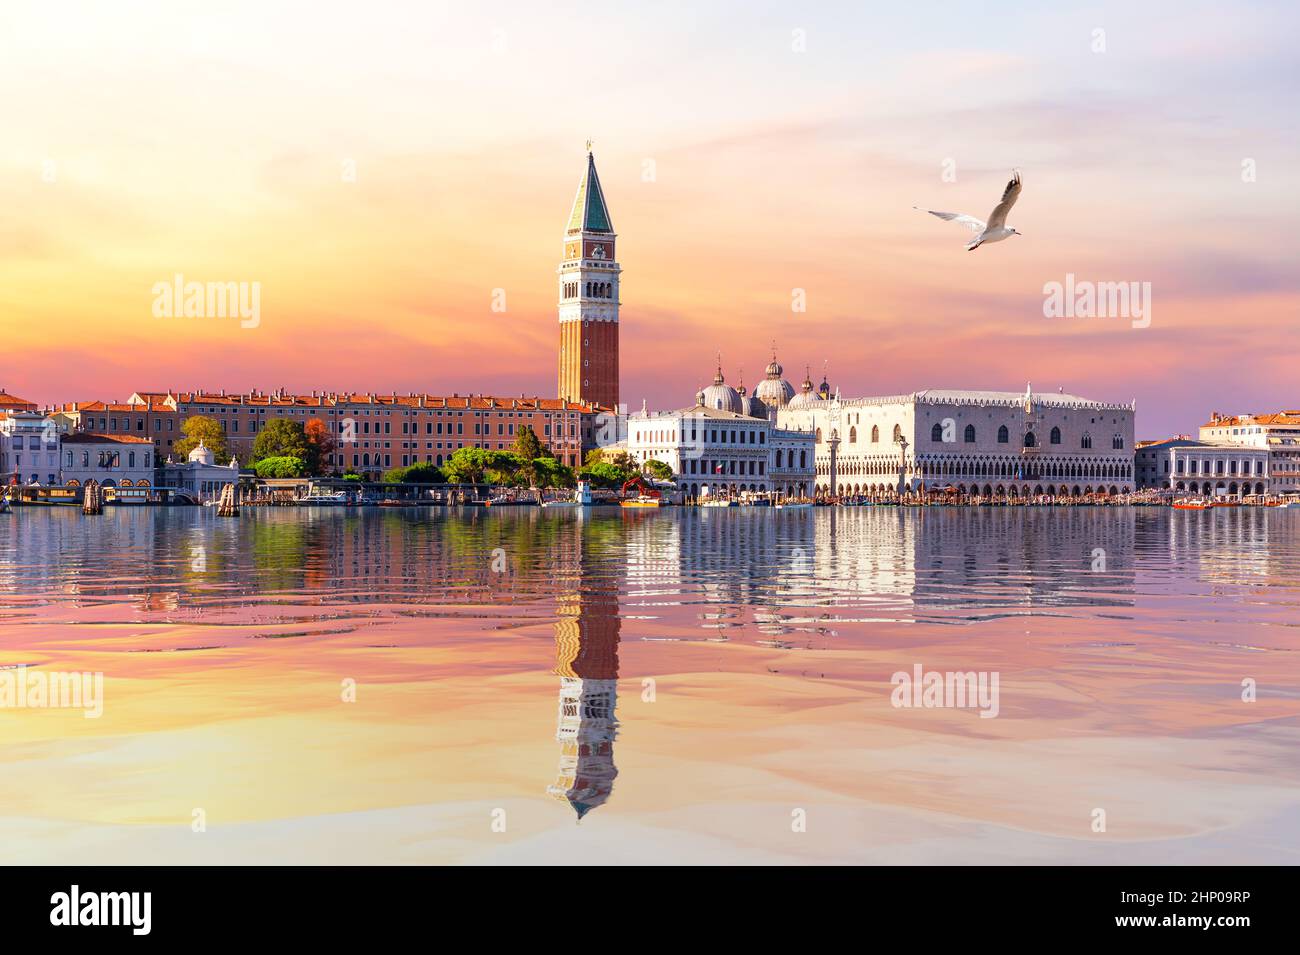 View of the Venice lagoon, St Mark's Bell Tower and Doge's palace at sunset, Italy. Stock Photo